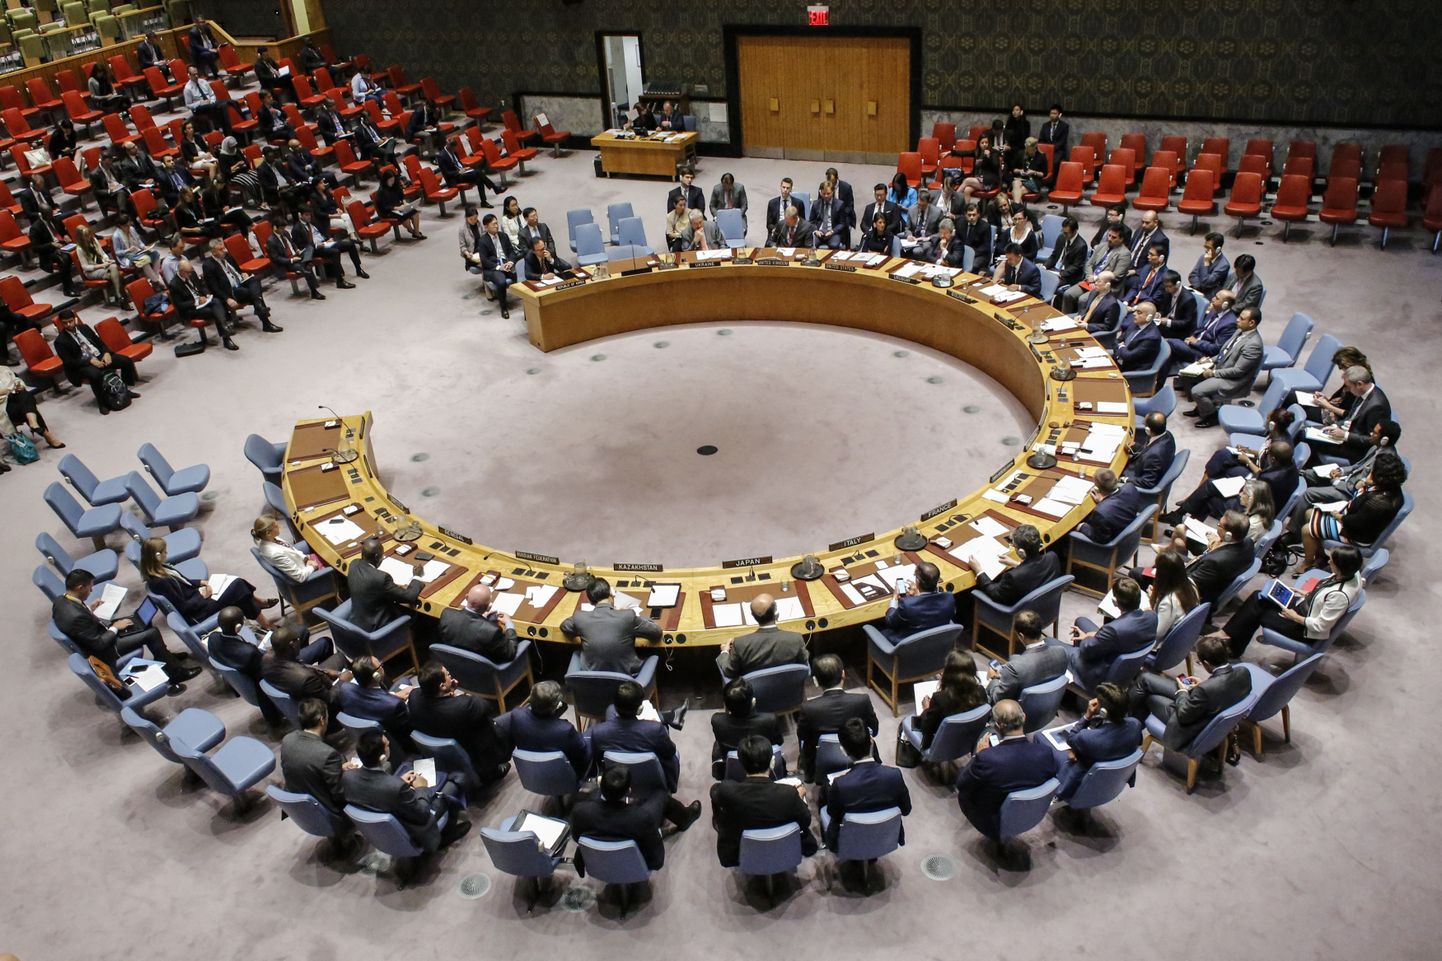 TOPSHOT - The UN Security Council during an emergency meeting over North Korea's latest nuclear test, on September 4, 2017, at UN Headquarters in New York.
The UN Security Council on Monday opened an emergency meeting to agree to a response to North Korea's sixth and most powerful nuclear test, as calls mounted for a new raft of tough sanctions to be imposed on Pyongyang. / AFP PHOTO / KENA BETANCUR